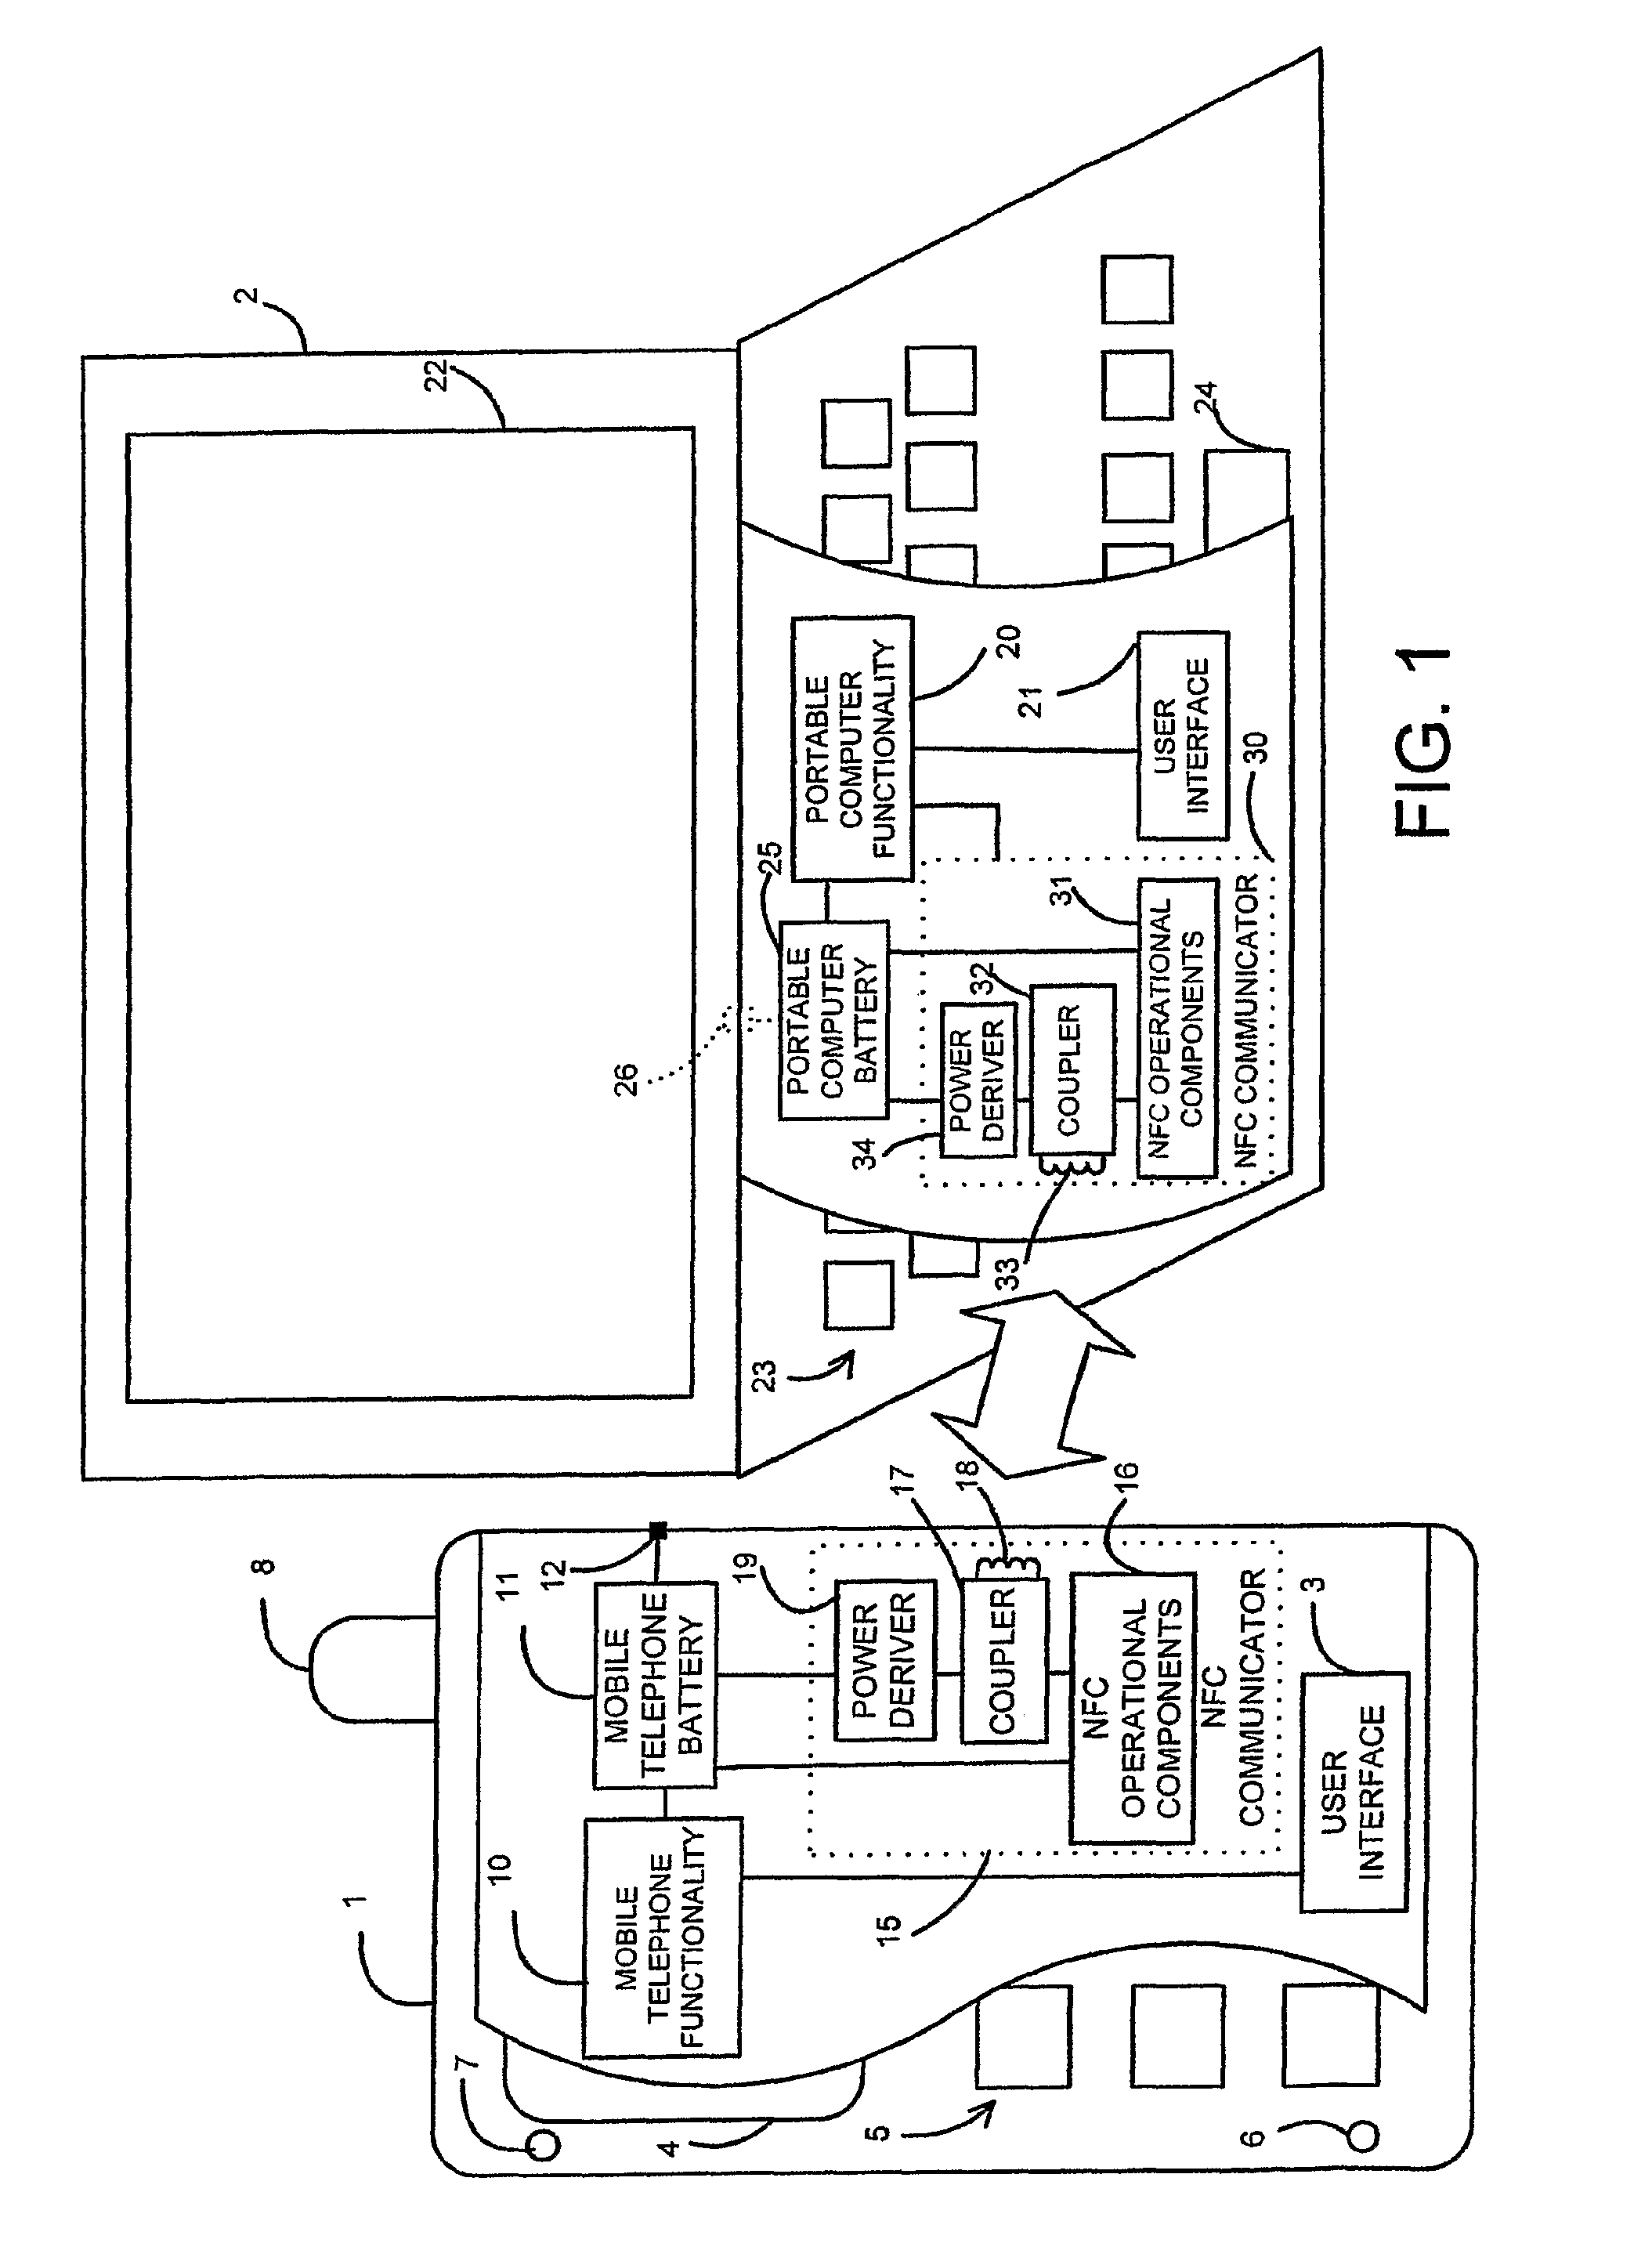 Near field RF communicators and near field communications enabled devices